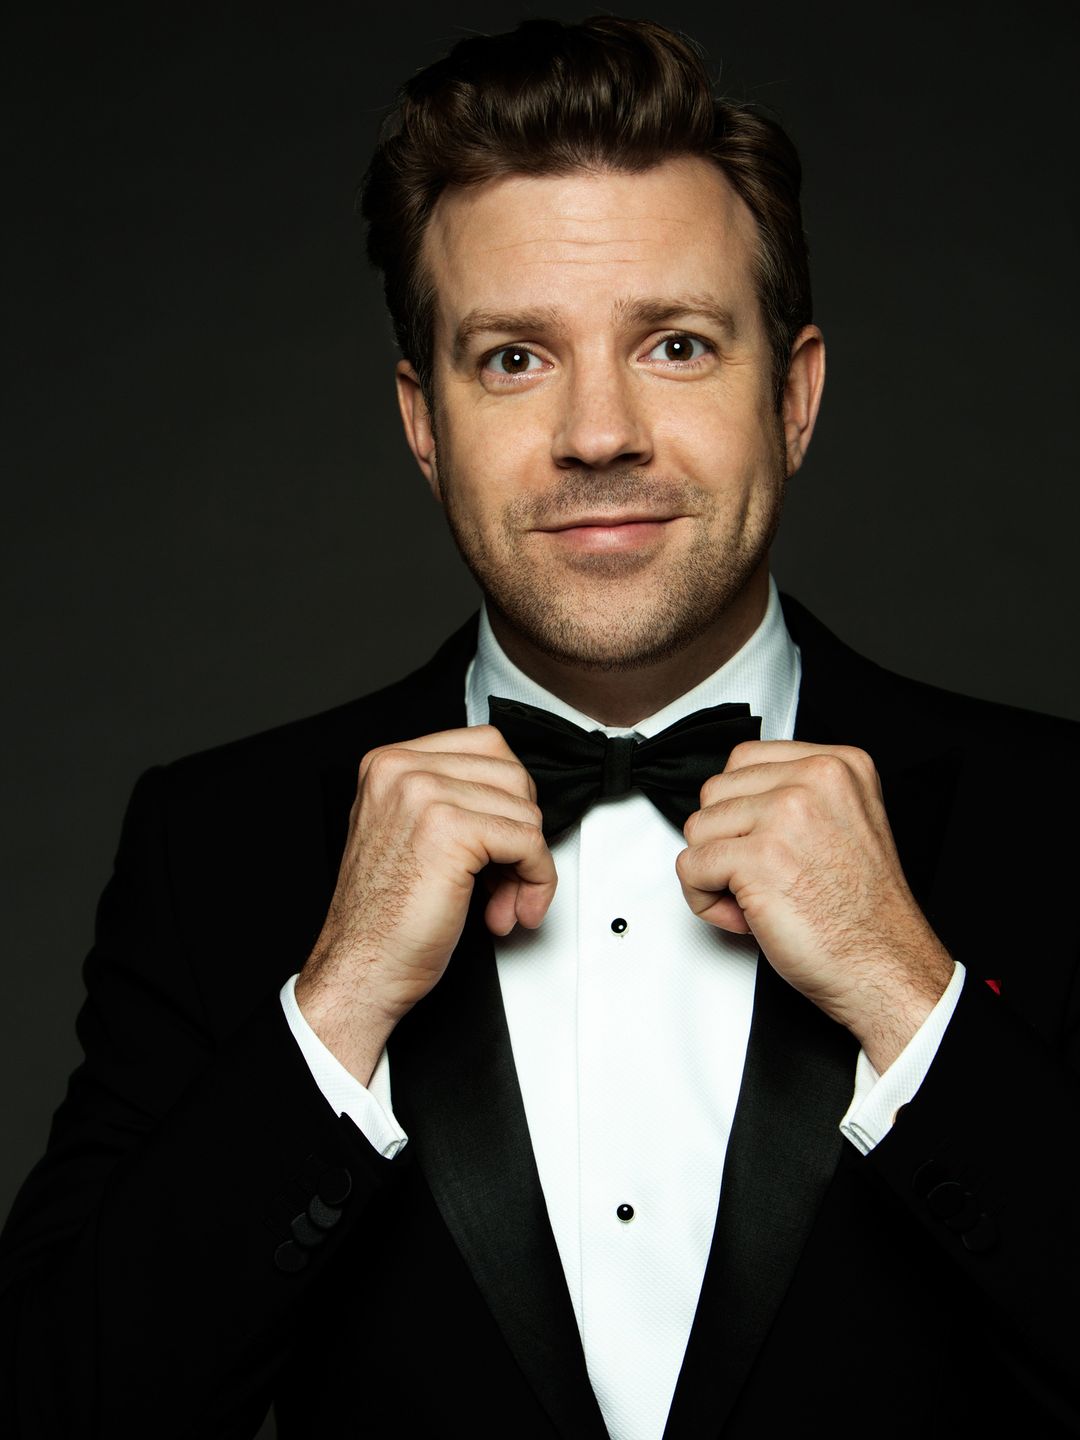 Jason Sudeikis in real life